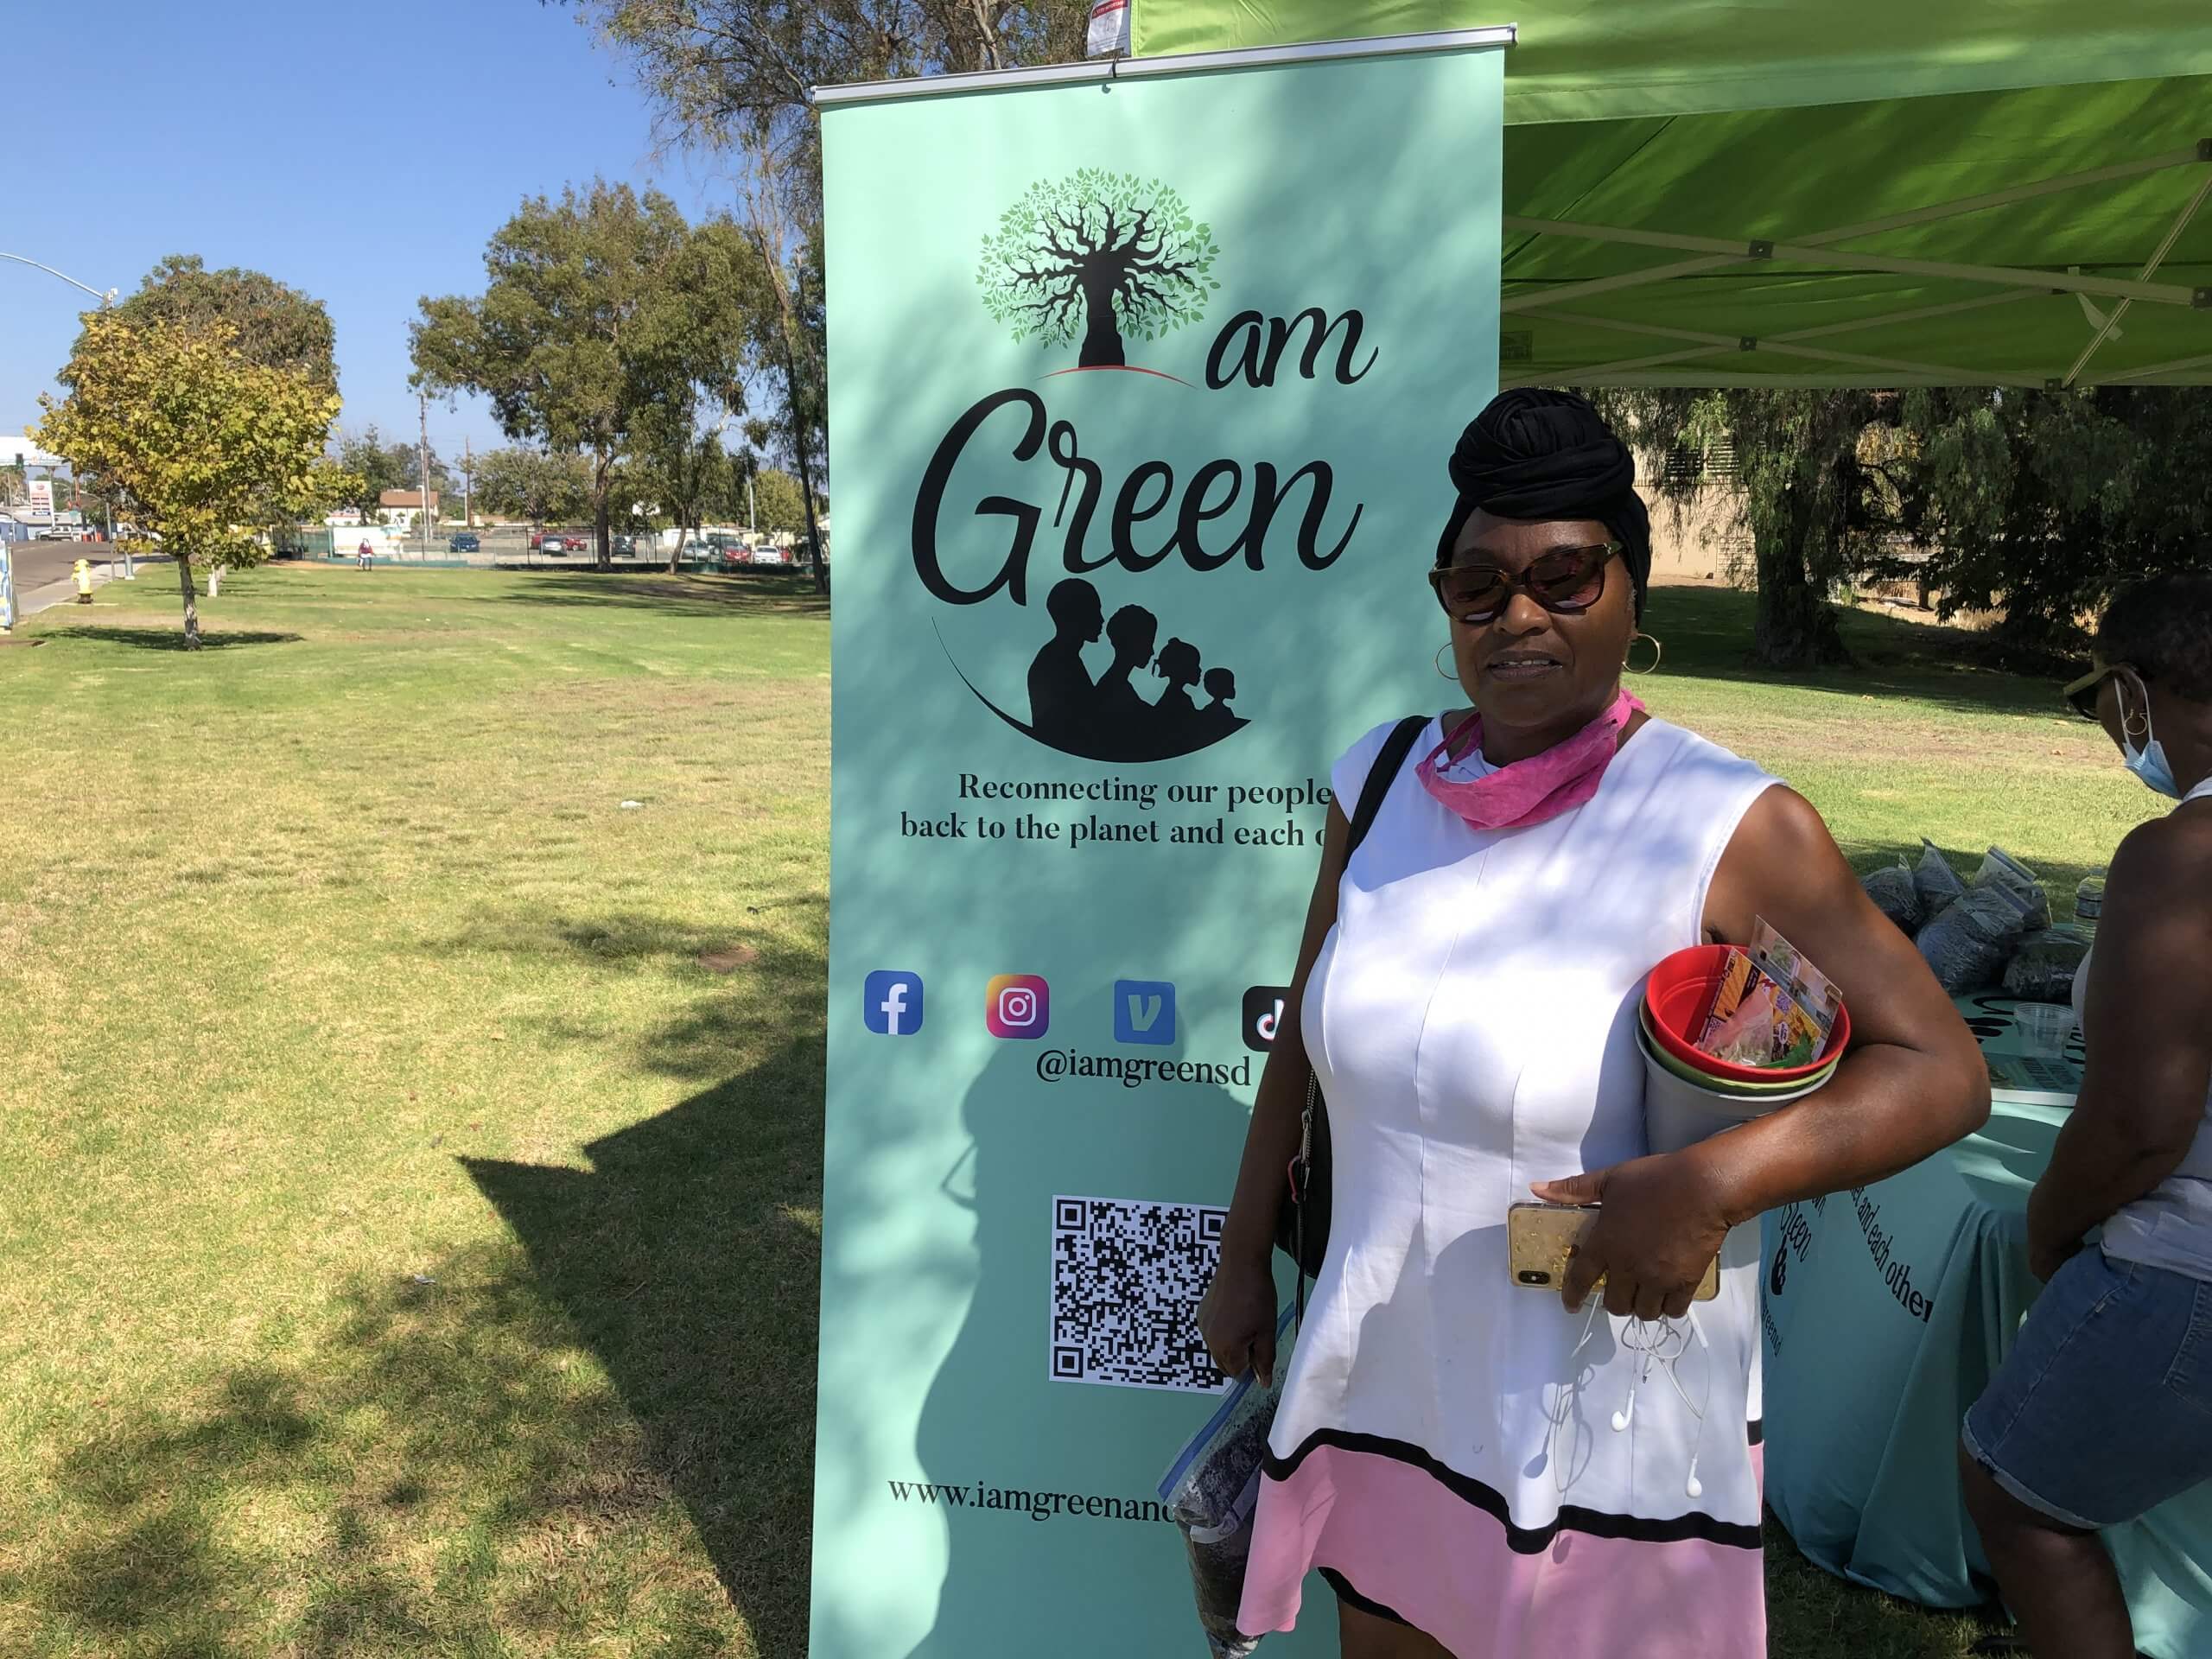 A person standing next to an "I am Green" sign outside on a sunny day